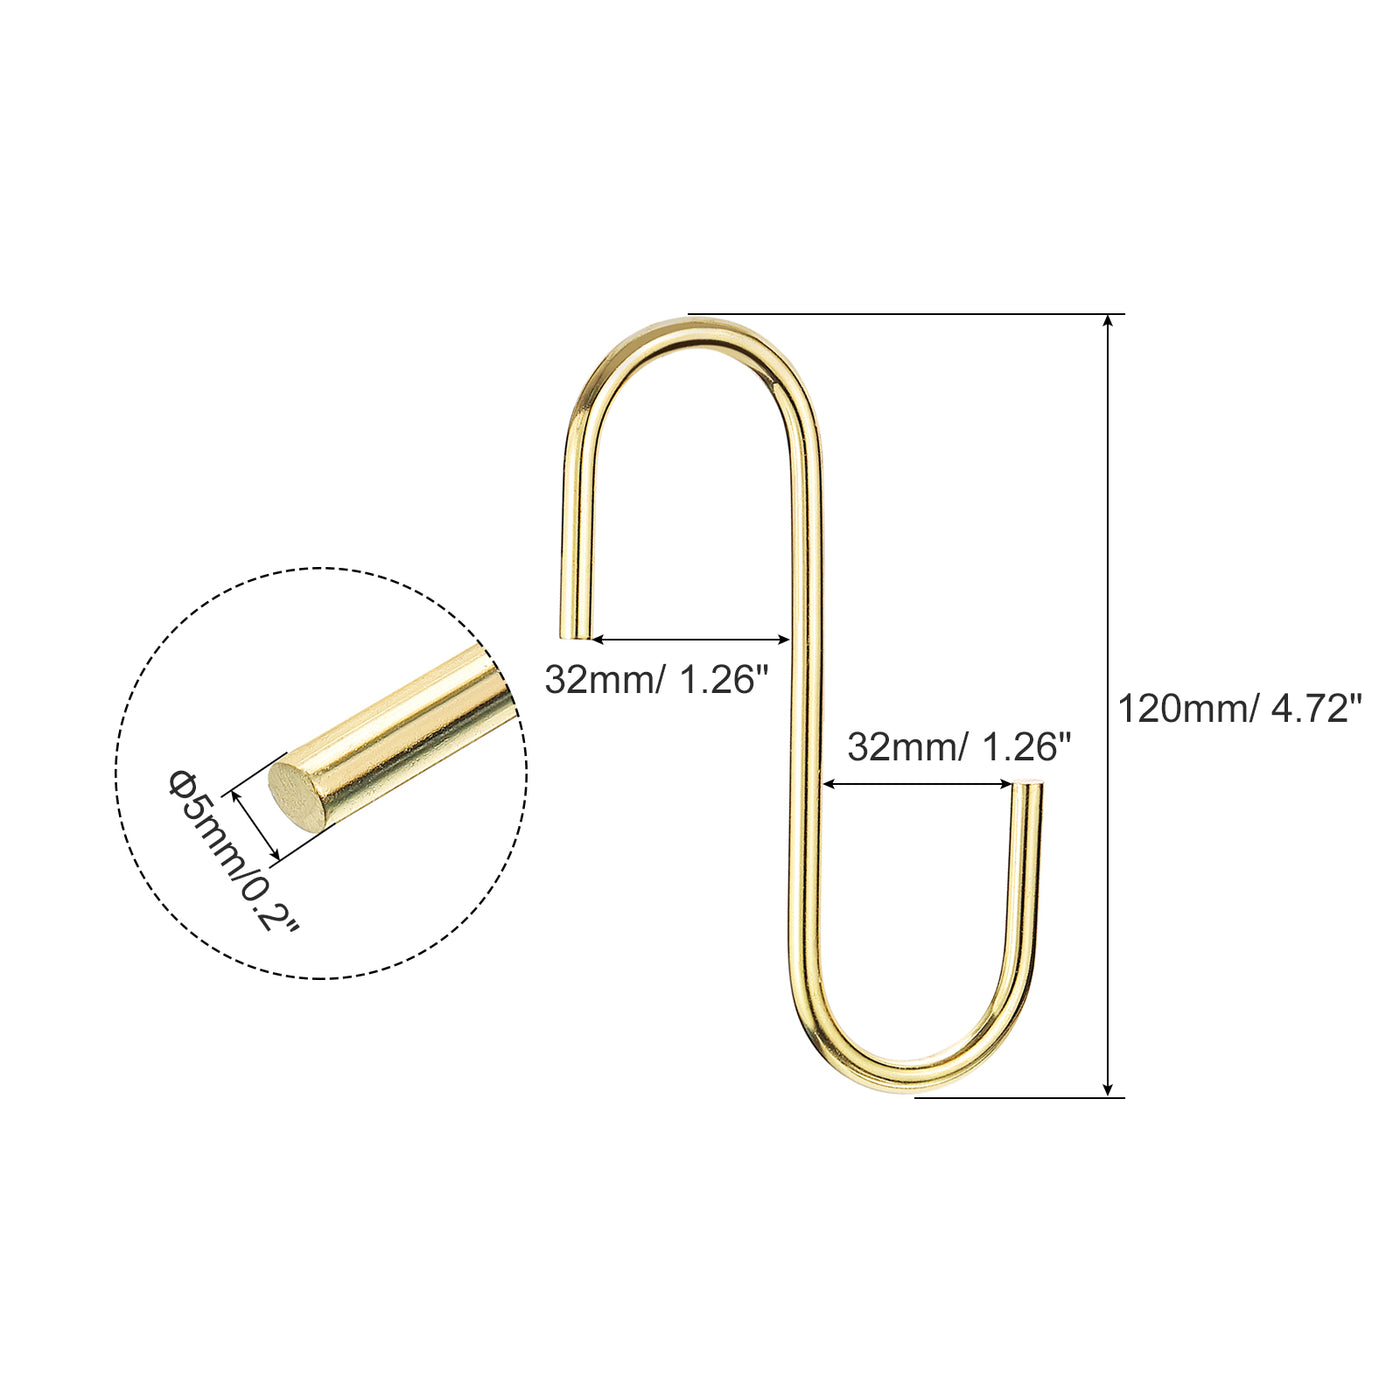 uxcell Uxcell S Hanging Hooks, 5inch(120mm) Extra Long Steel Hanger, Indoor Outdoor Uses for Garden, Bathroom, Closet, Workshop, Kitchen, Gold Tone, 2Pcs